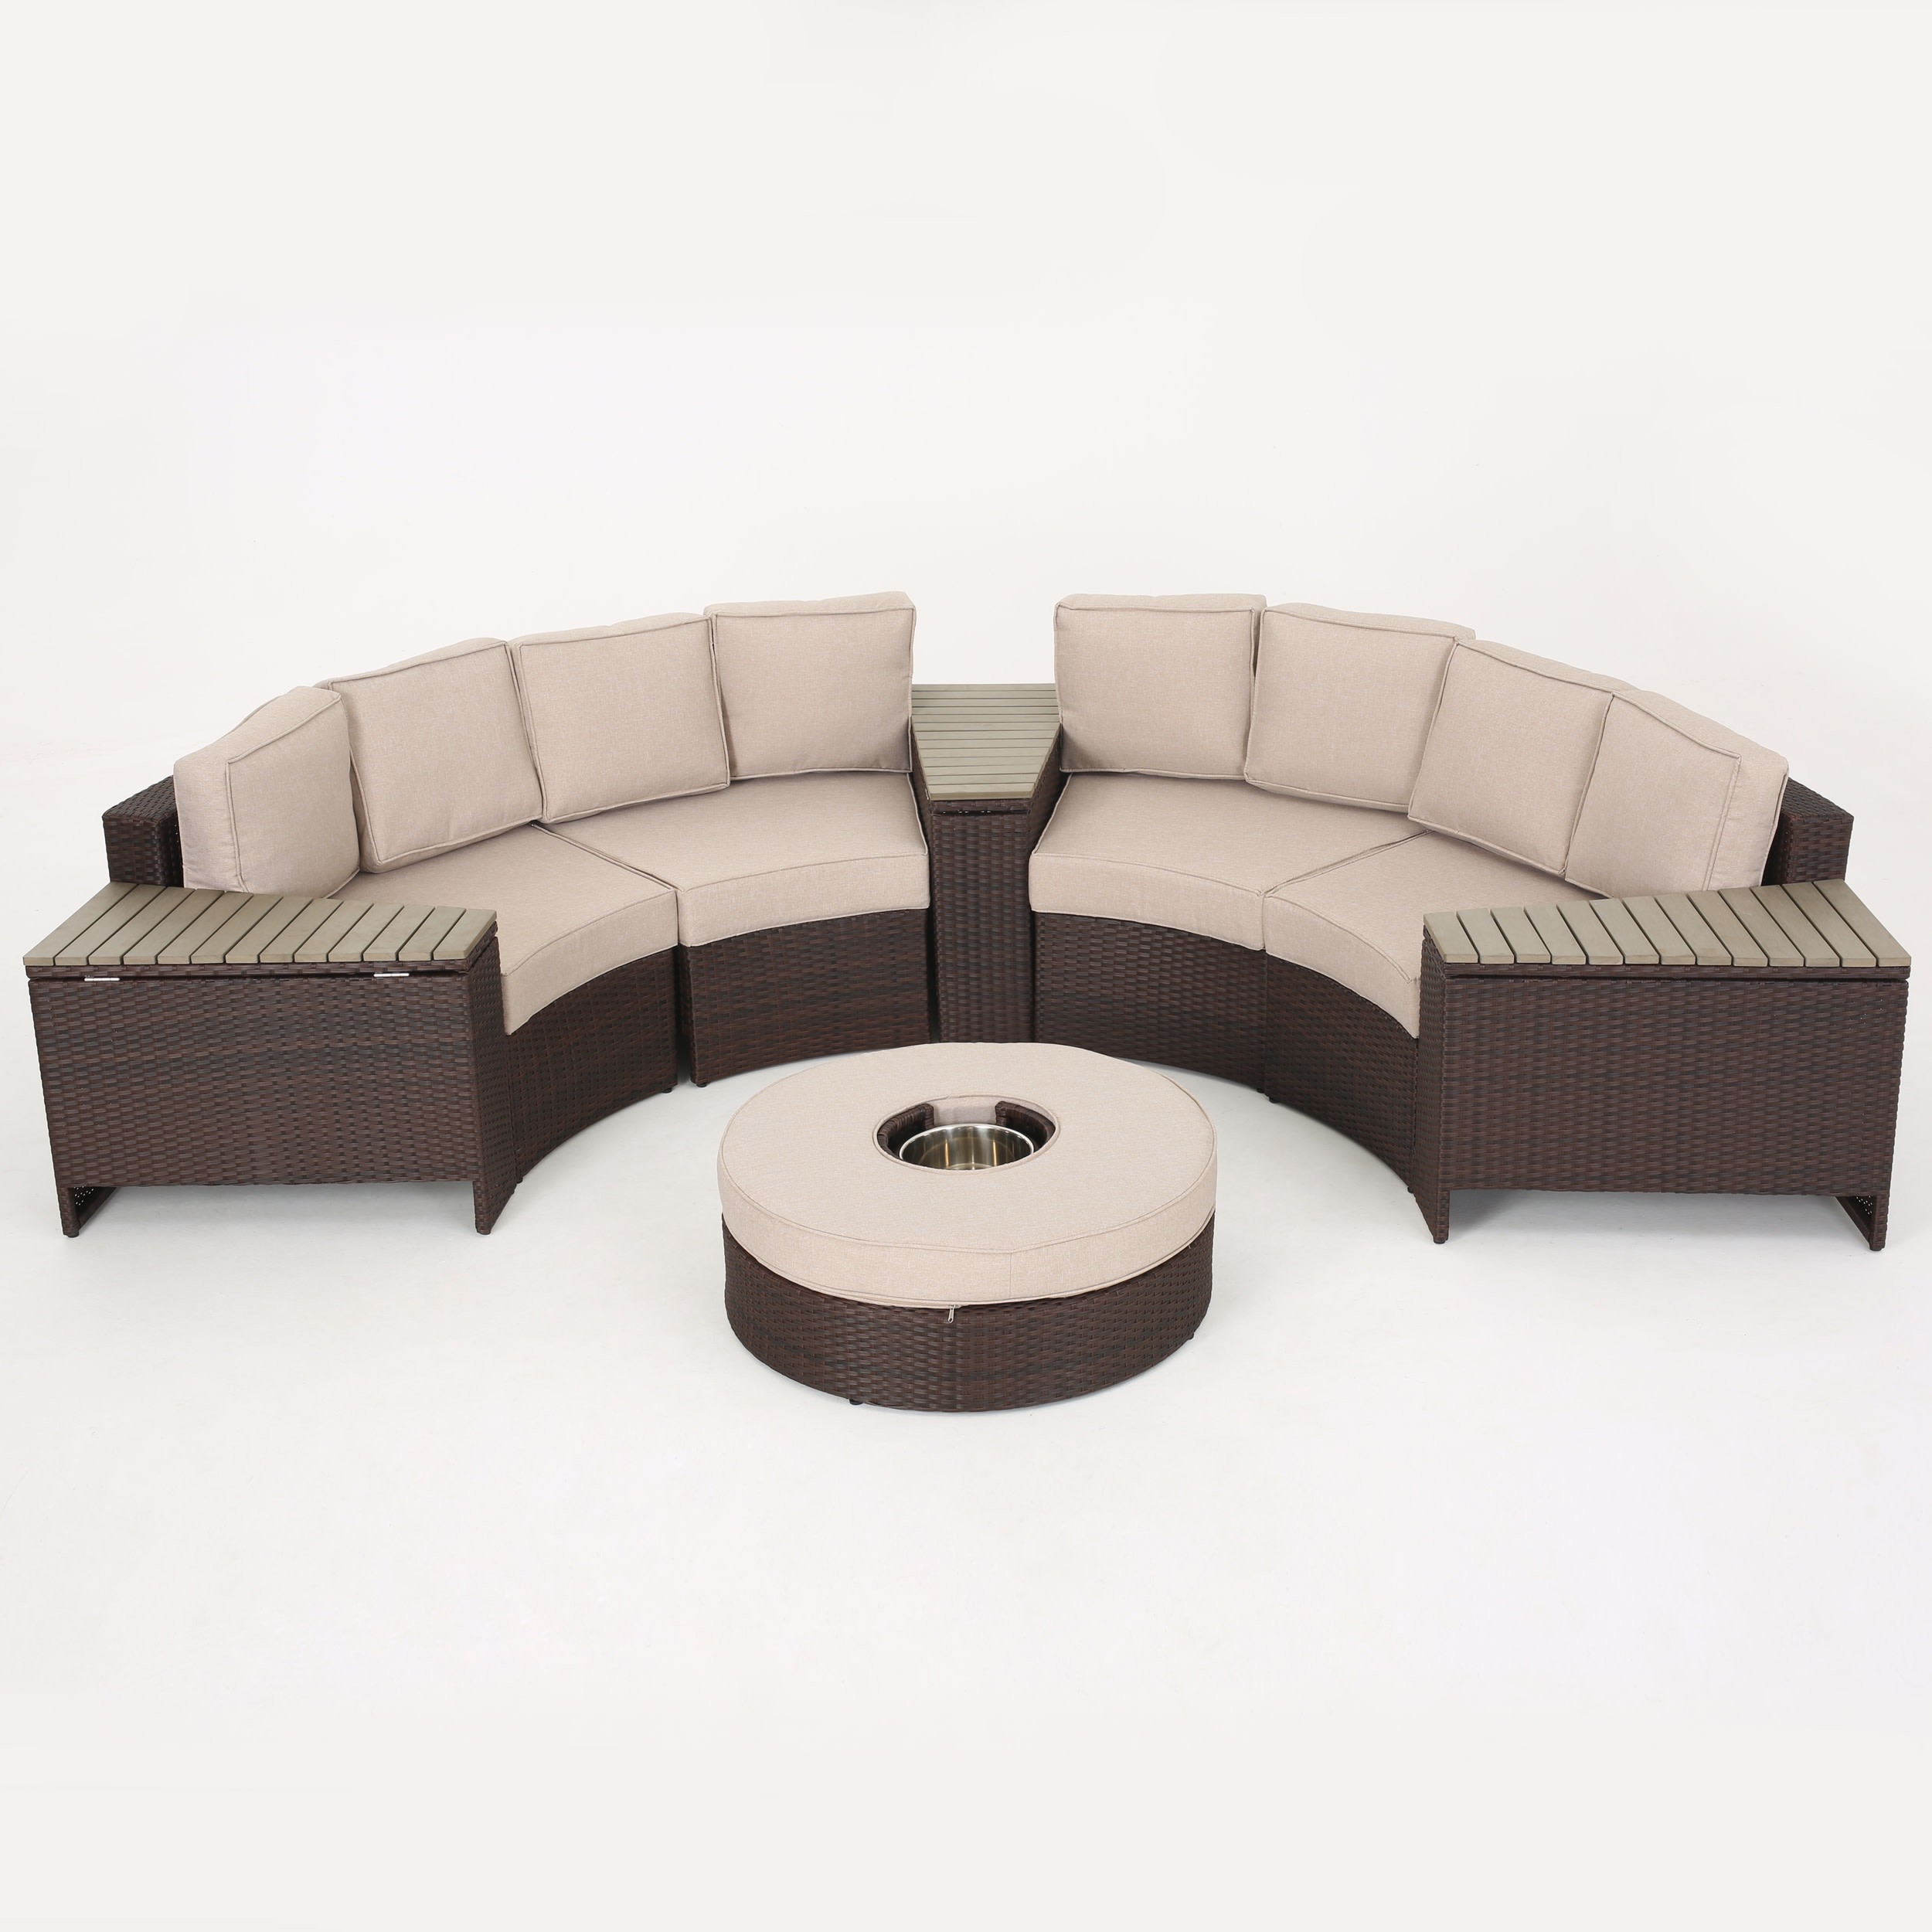 GDF Studio Bankston Outdoor Wicker Half Round 4 Seater Sectional Set with Ice Bucket Ottoman, Textured Beige and Brown - image 1 of 13